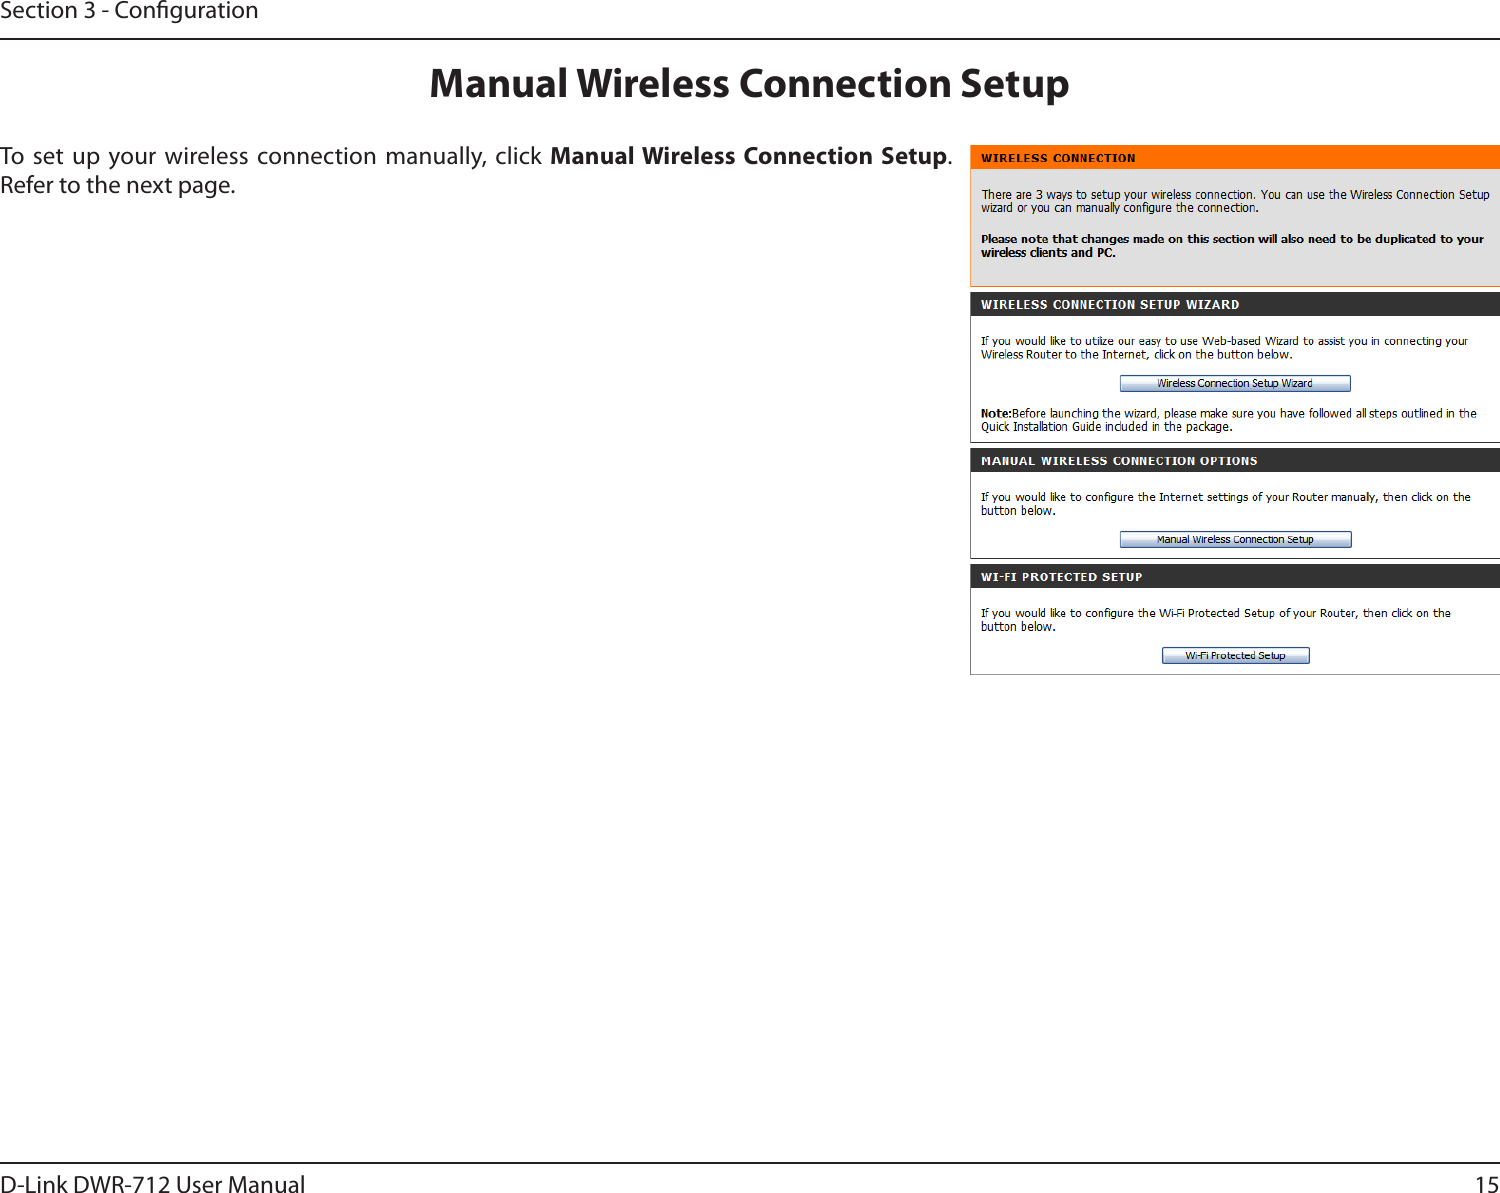 15D-Link DWR-712 User ManualSection 3 - CongurationManual Wireless Connection SetupTo set up your wireless connection manually, click Manual Wireless Connection Setup.  Refer to the next page.